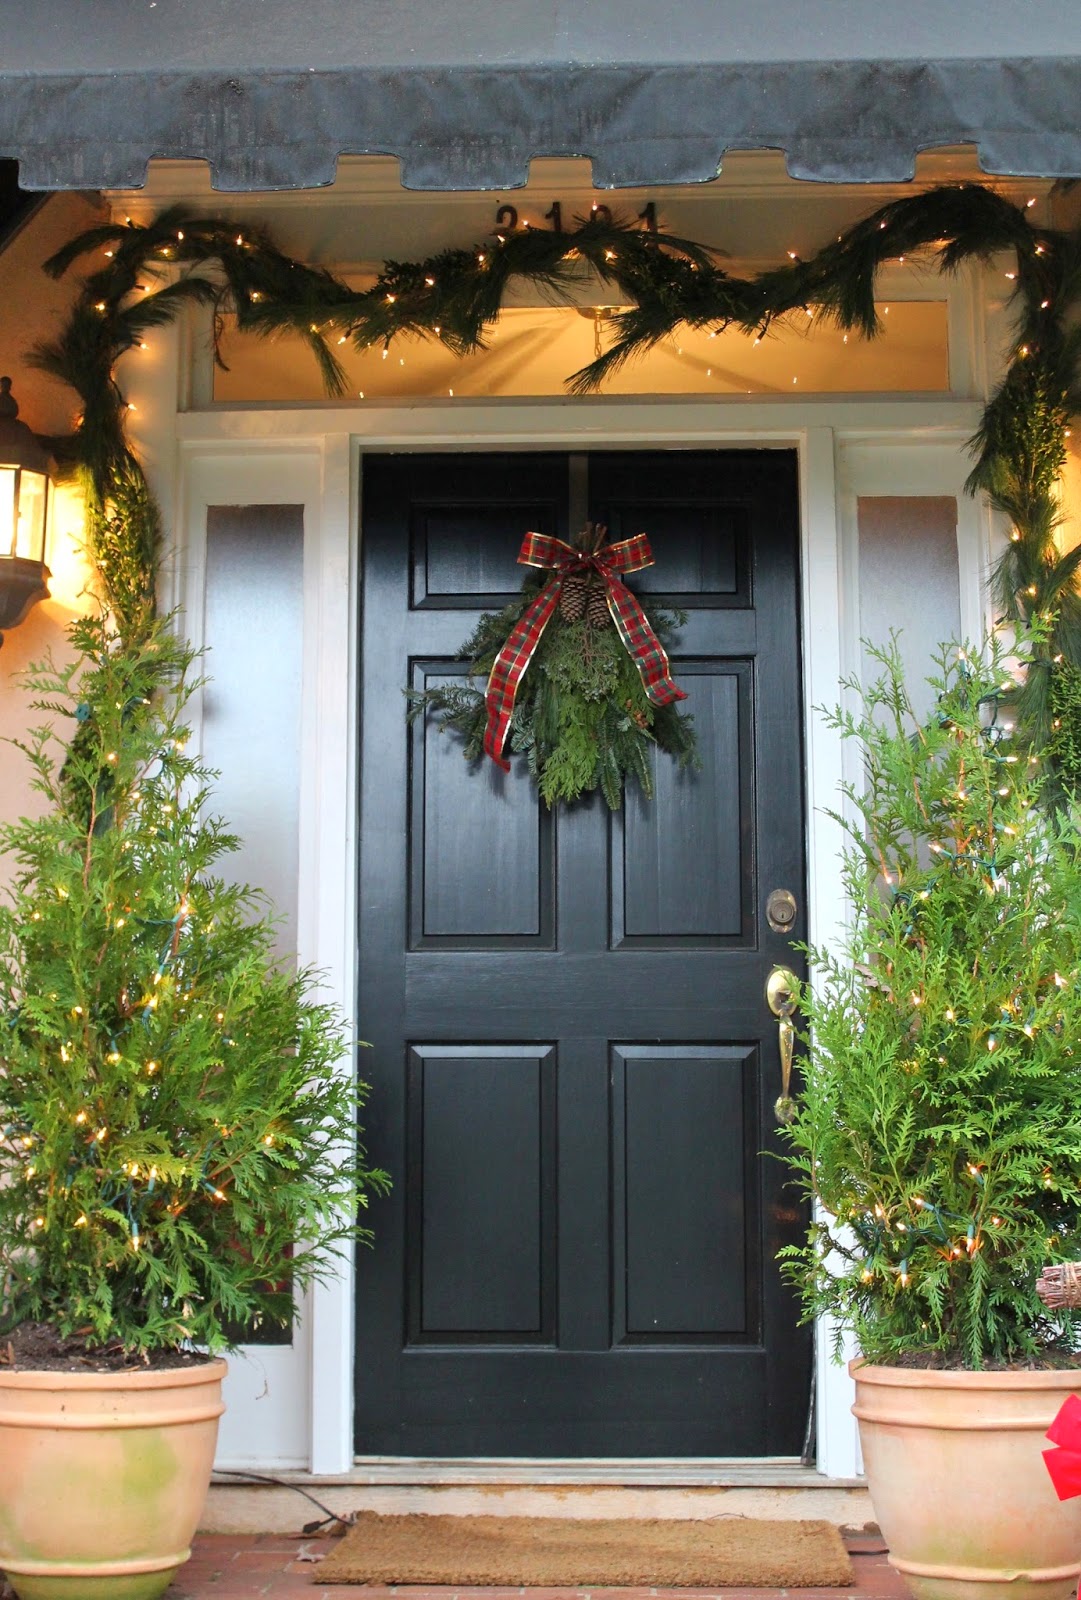 Designing Domesticity: Holiday Front Entry 2014